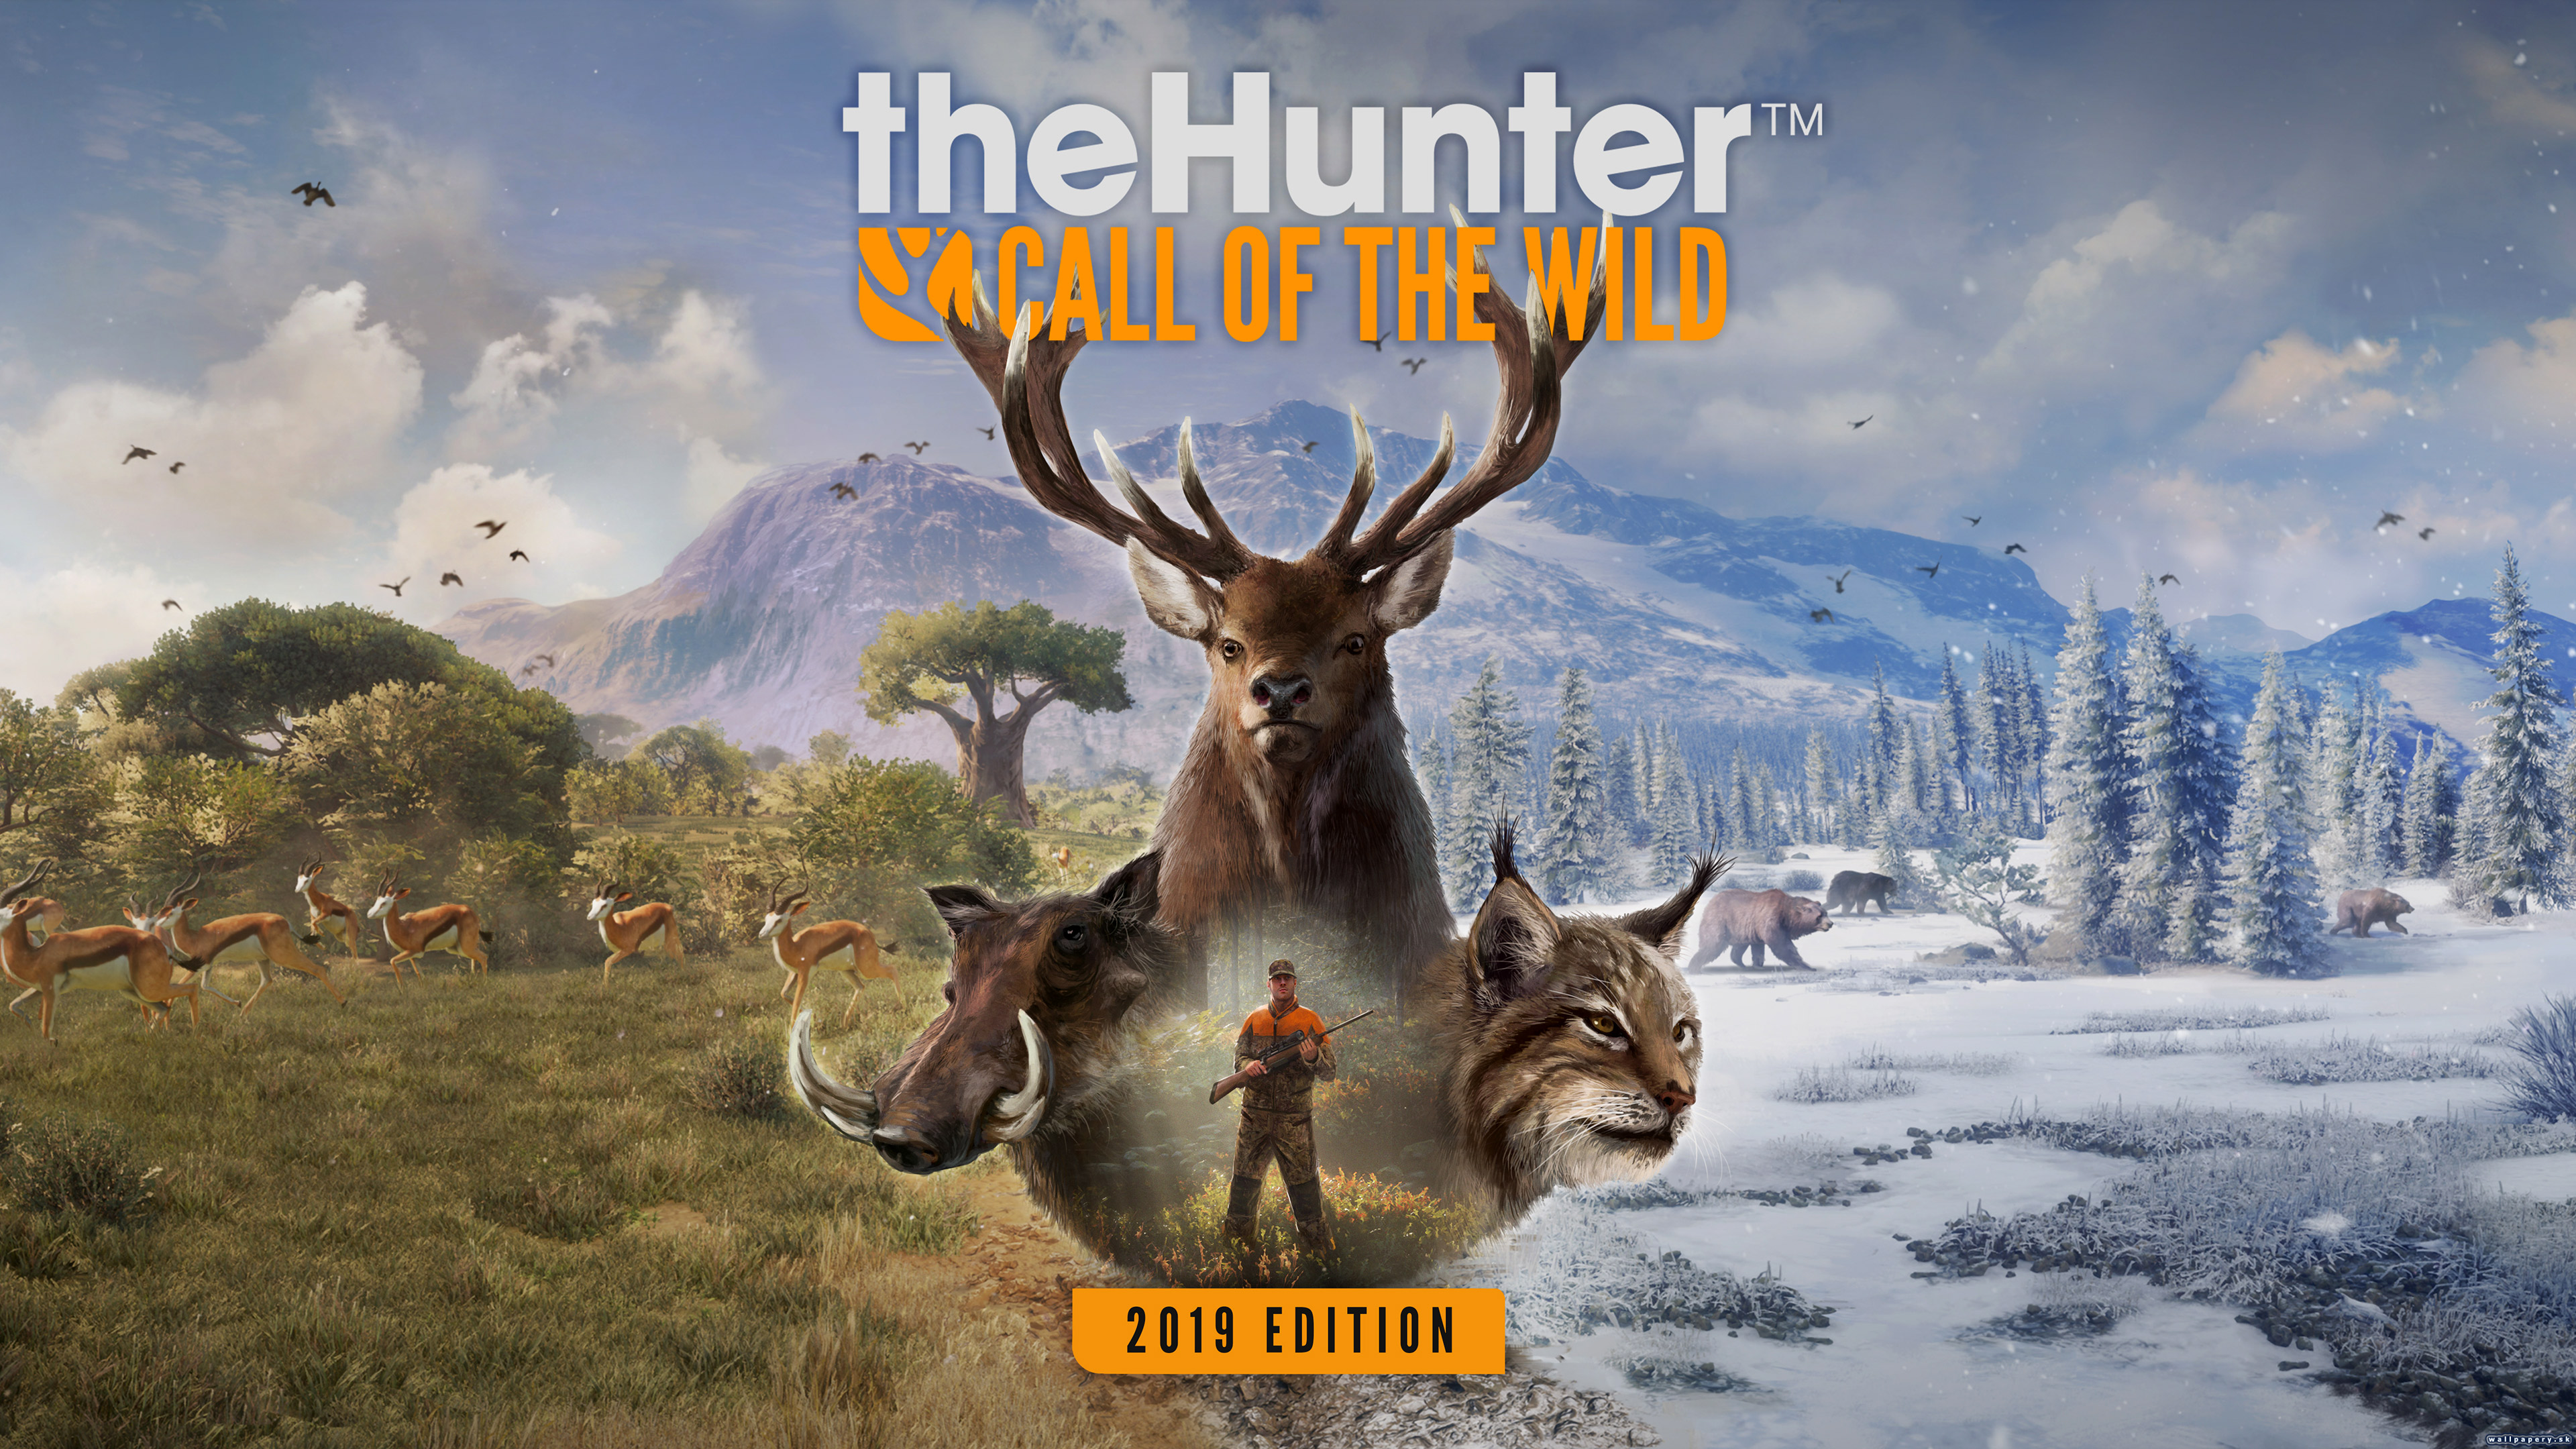 Call of the wild games. Игра the Hunter Call of the Wild. Игра охота the Hunter Call of the Wild. The Hunter Call of the Wild обложка. THEHUNTER: Call of the Wild превью.